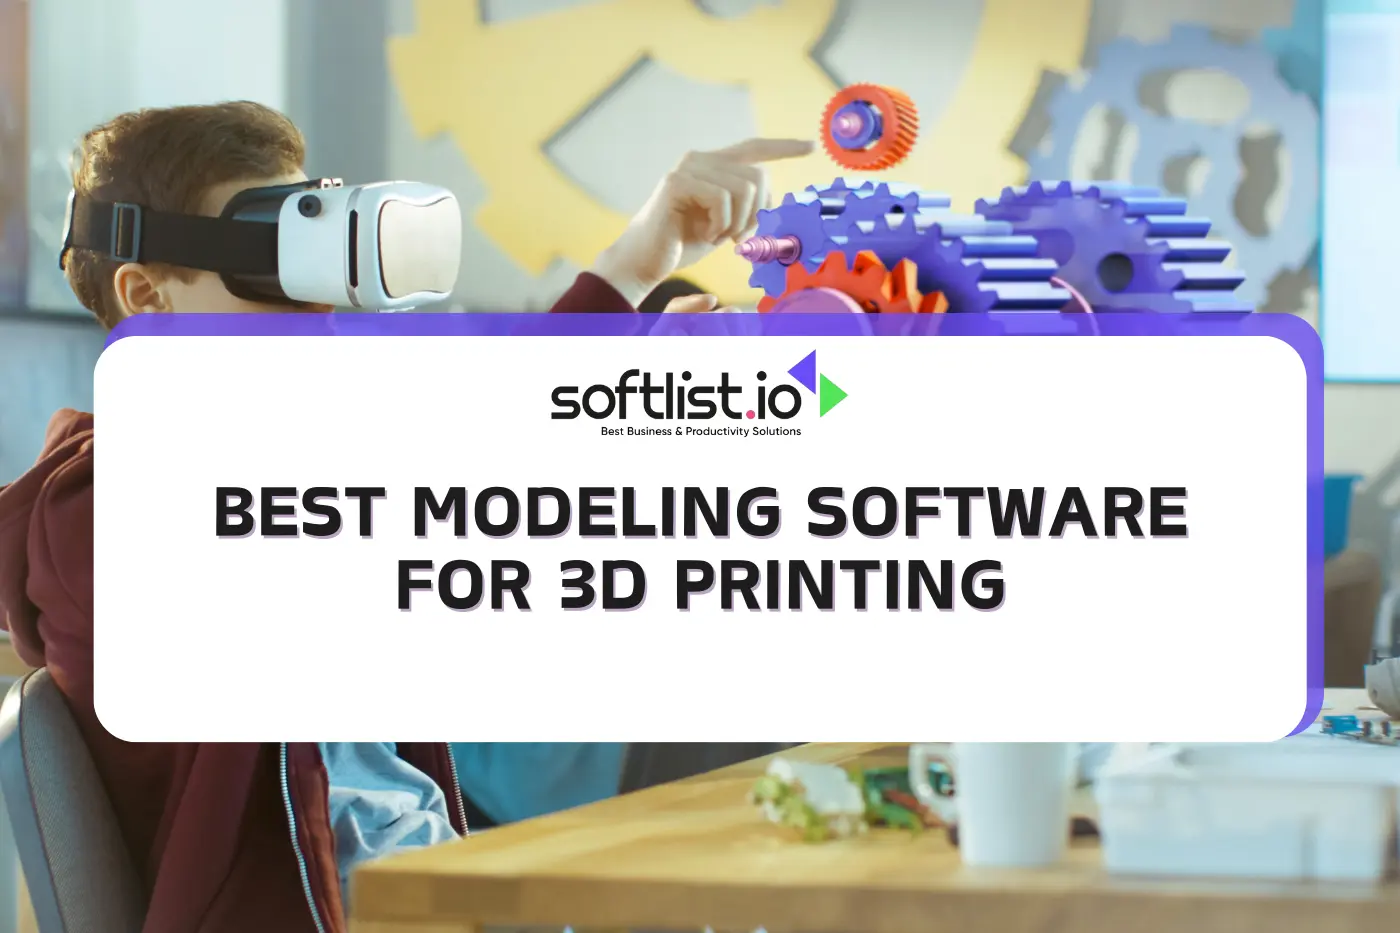 Ultimate Guide to 17+ 3D Printing Software: Best 3D Design and Modeling Tools for 3D Printers